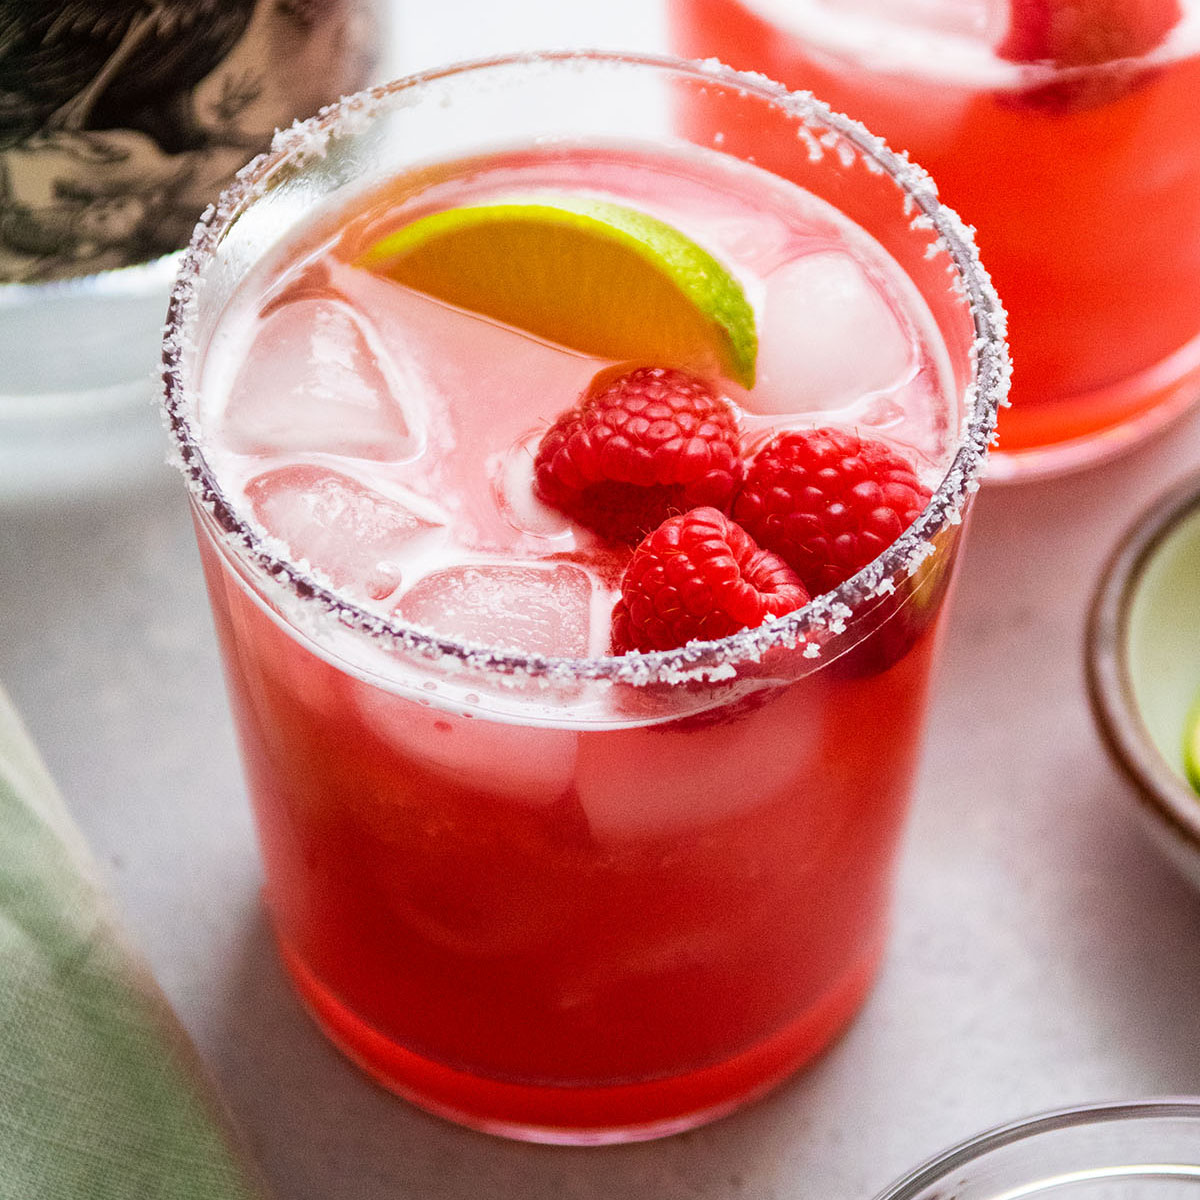 Margarita in a short glass, topped with fresh raspberries and a lime wedge.